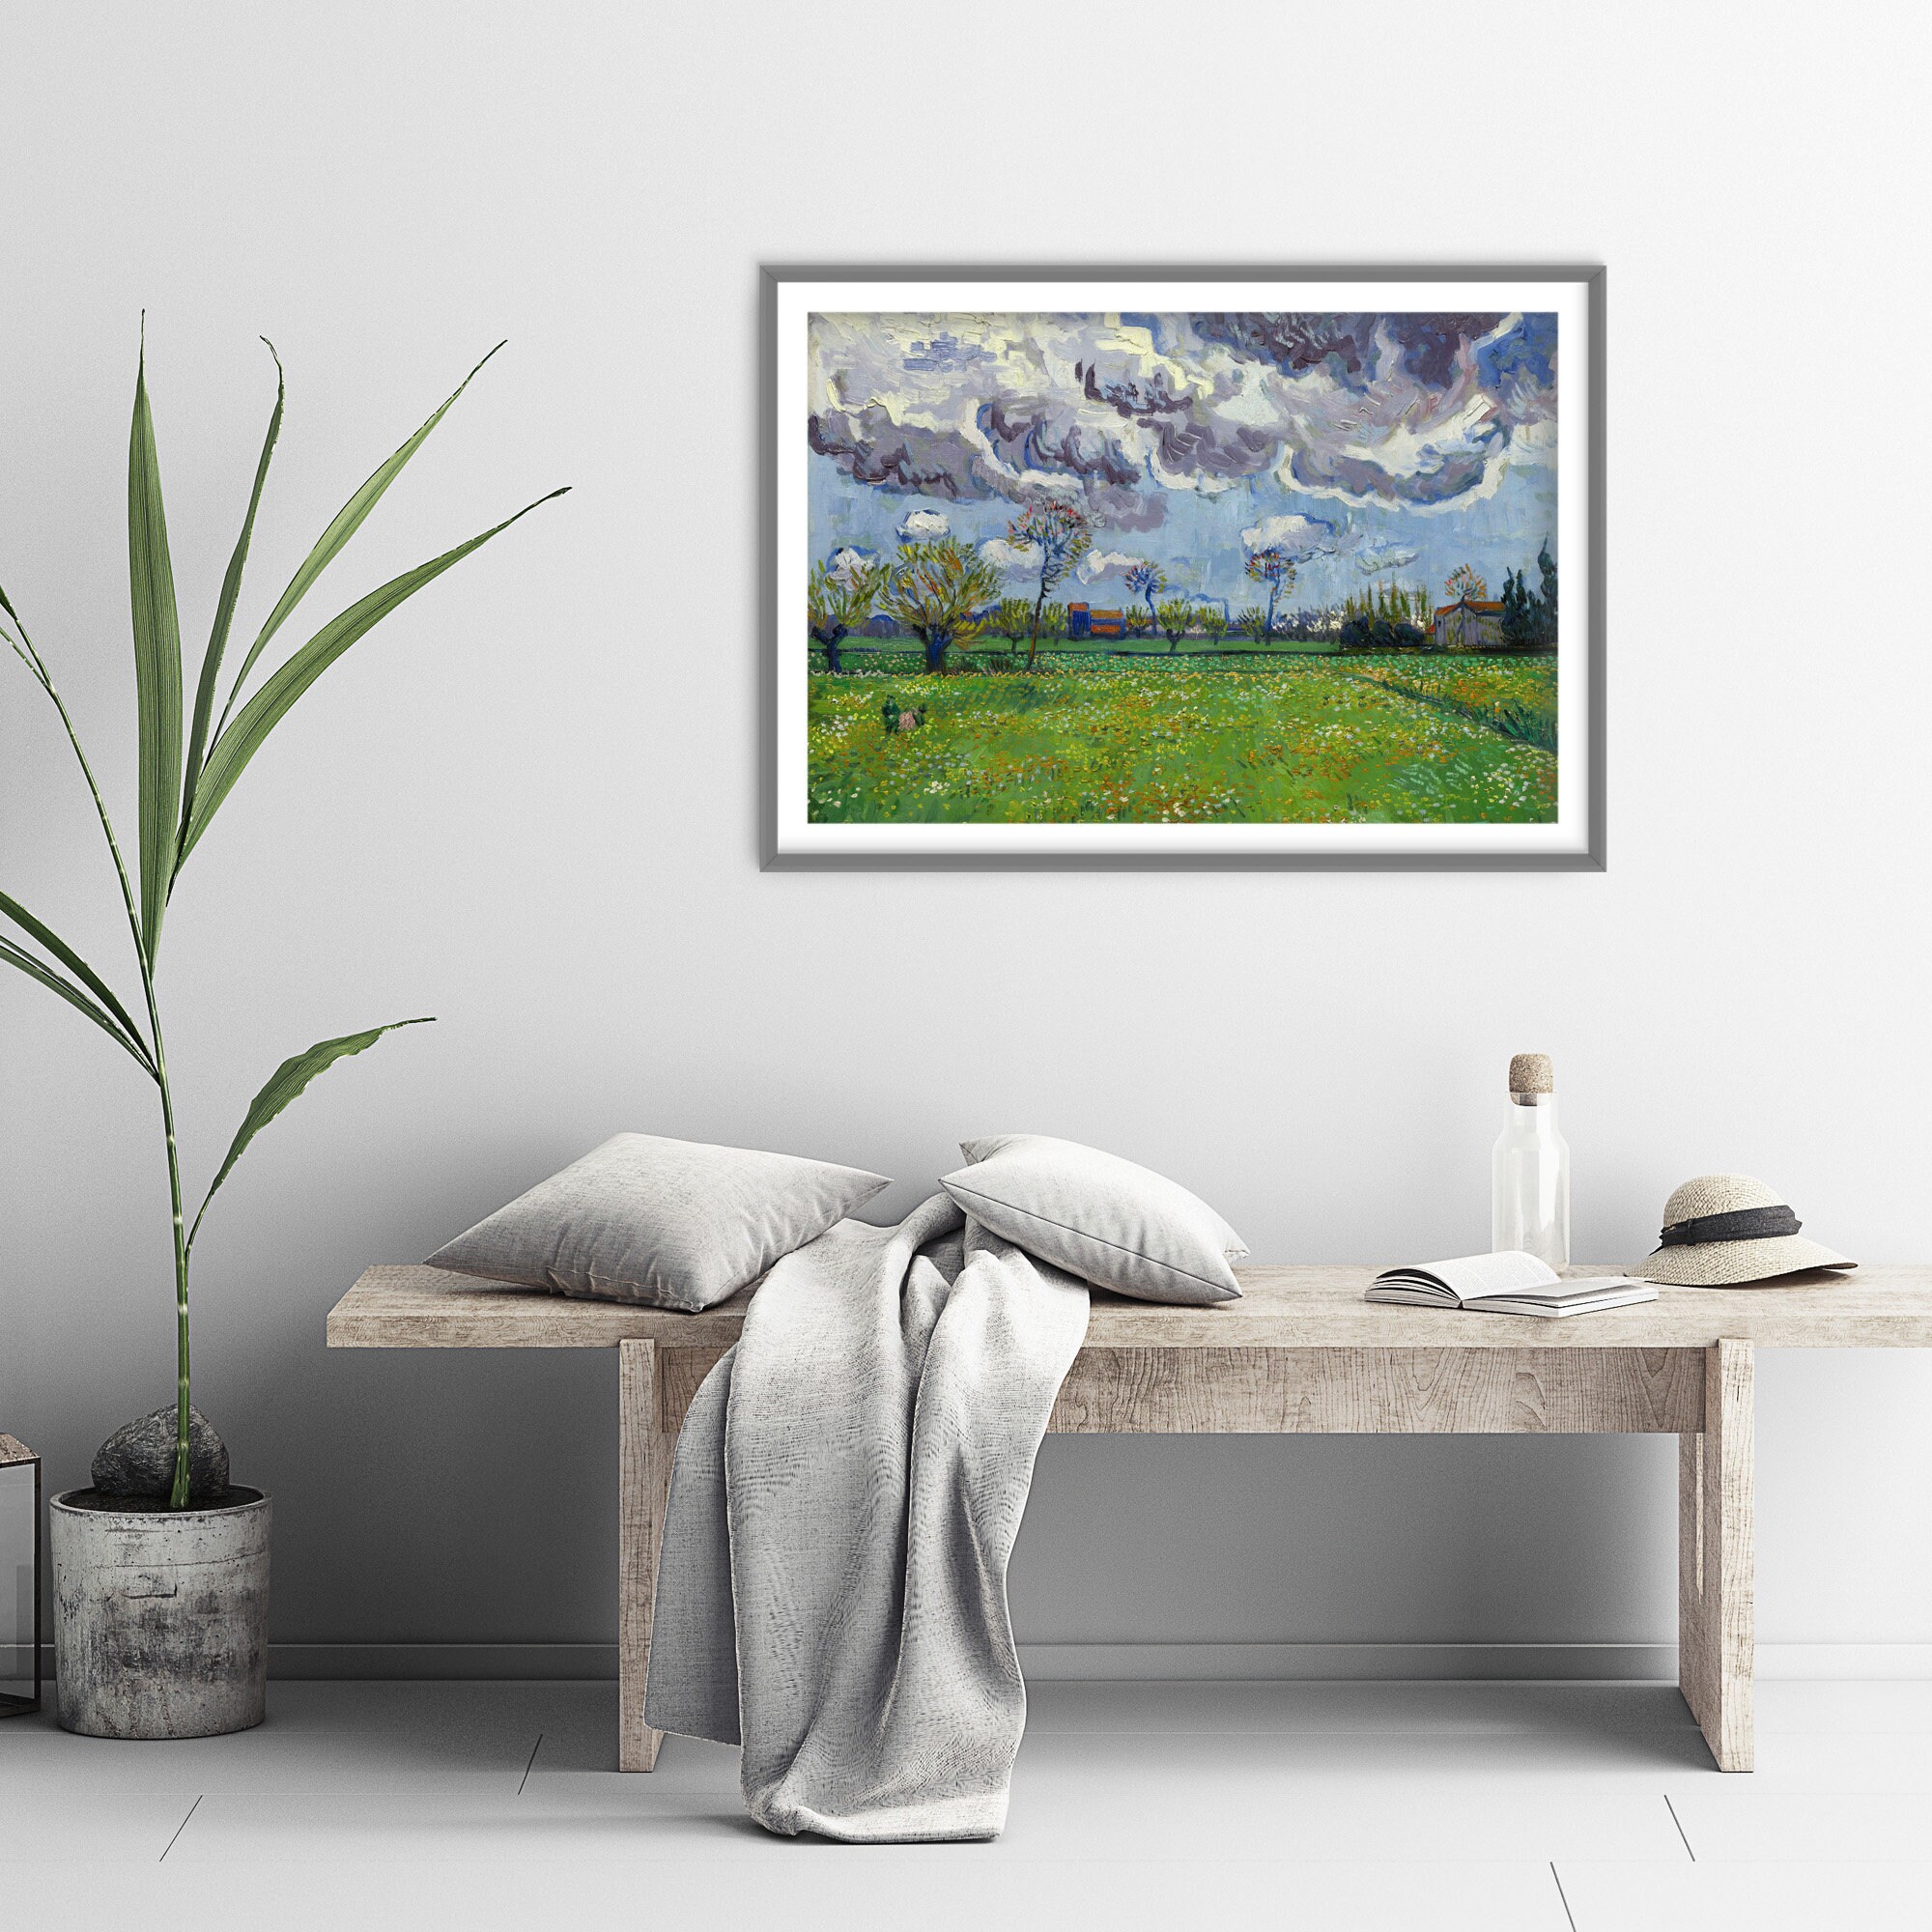 Vincent Van Gogh Meadow With Flowers Under a Storm Sky | Etsy UK